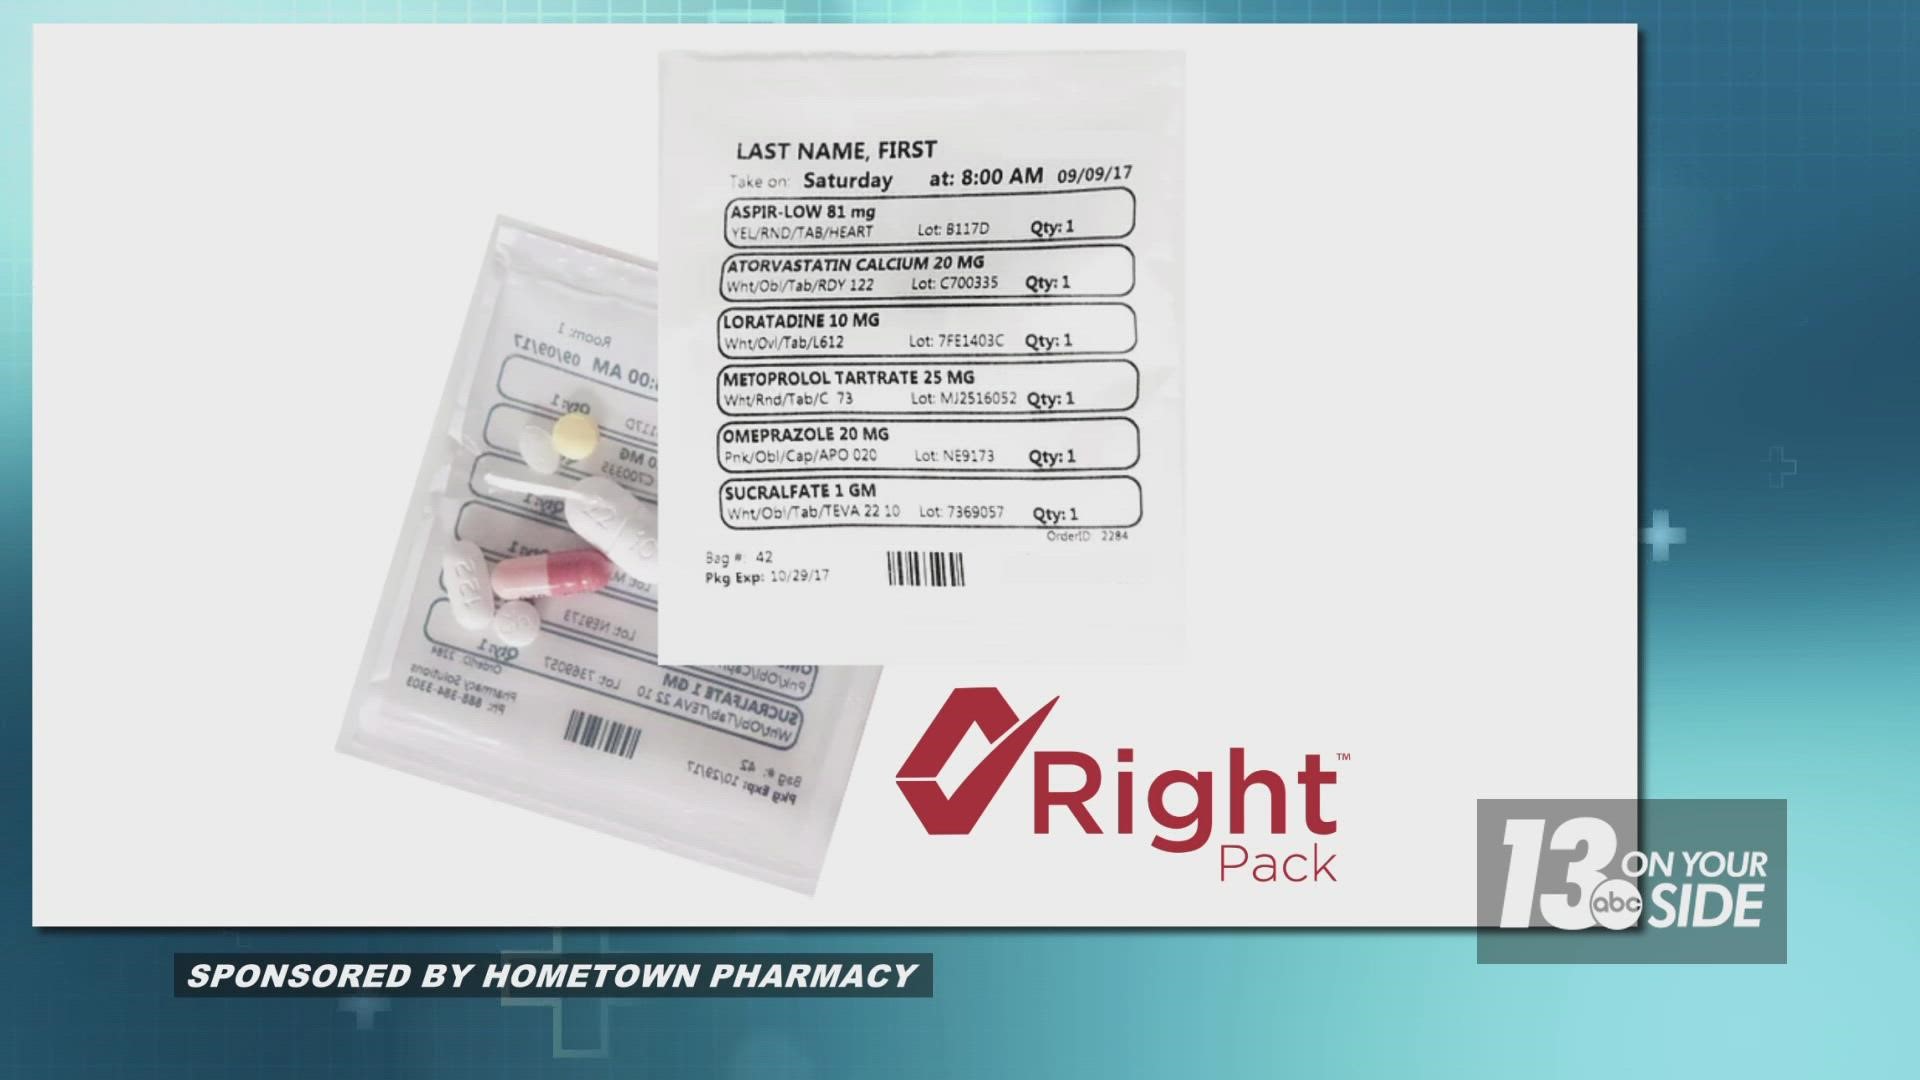 Derek VanGalder is the Director of Pharmacy at HomeTown Pharmacy and he joined us to explain how the Right Pack medicine management system works.